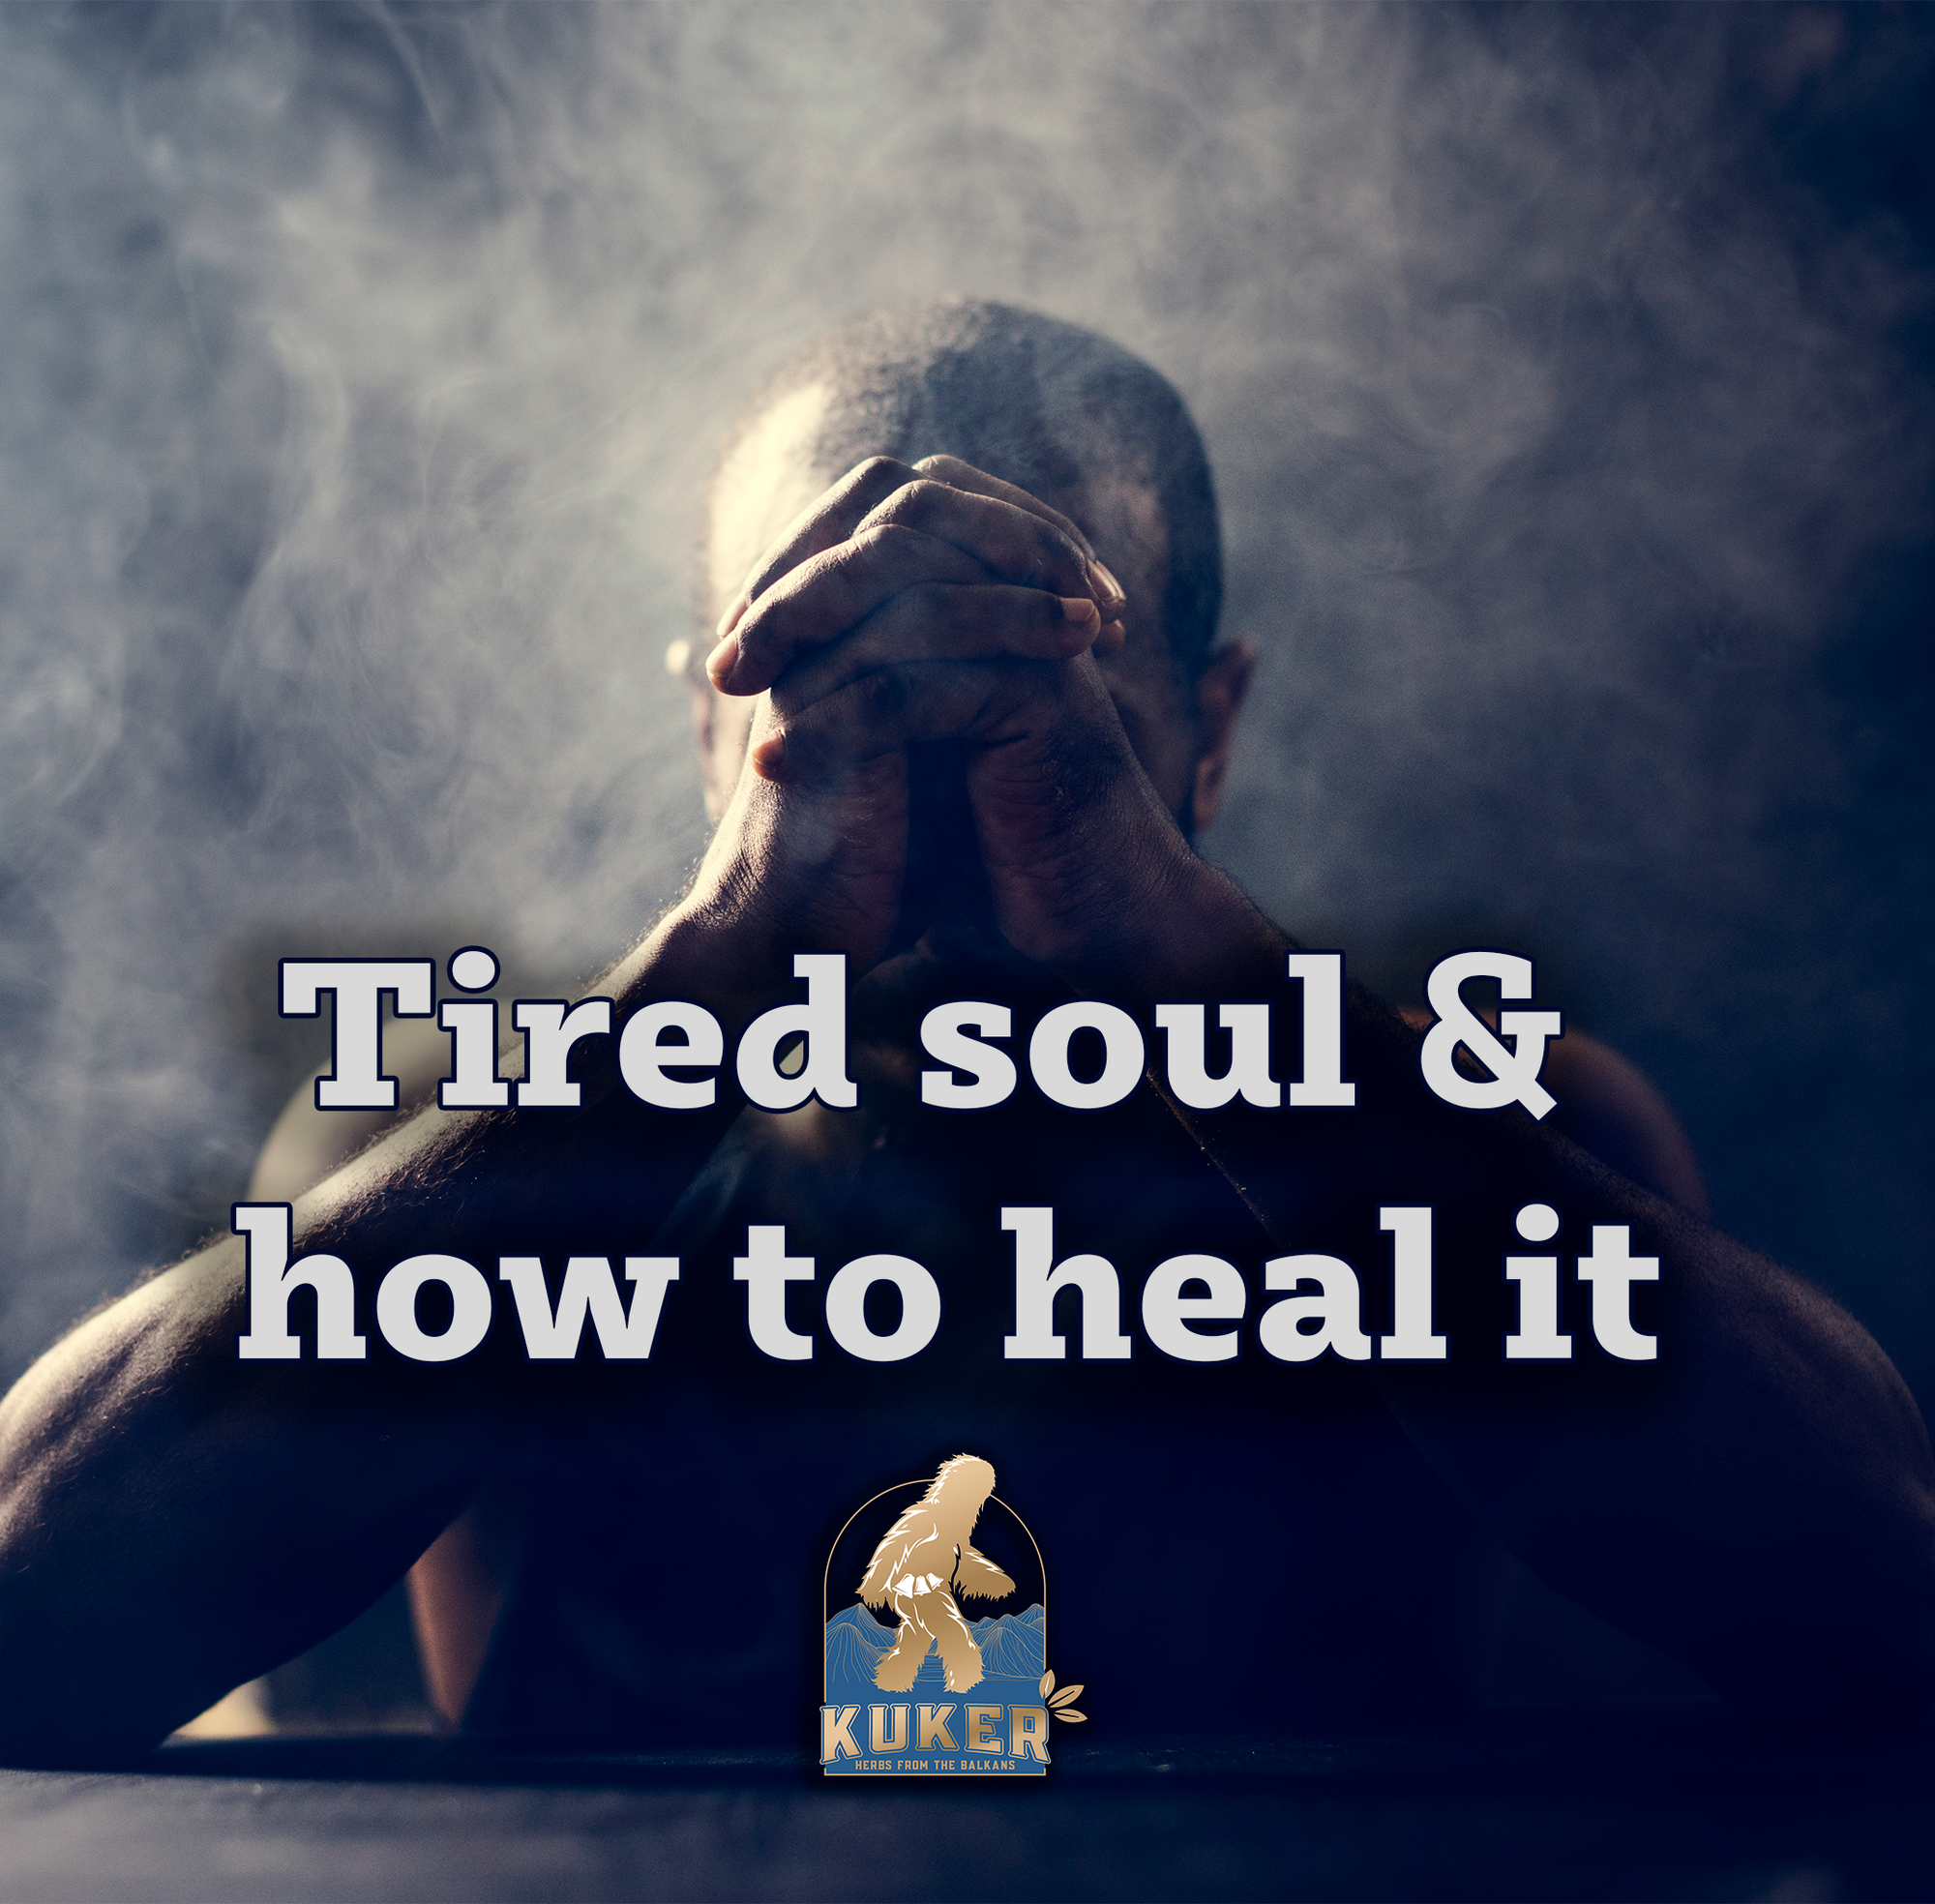 Signs of a tired soul & how to heal it